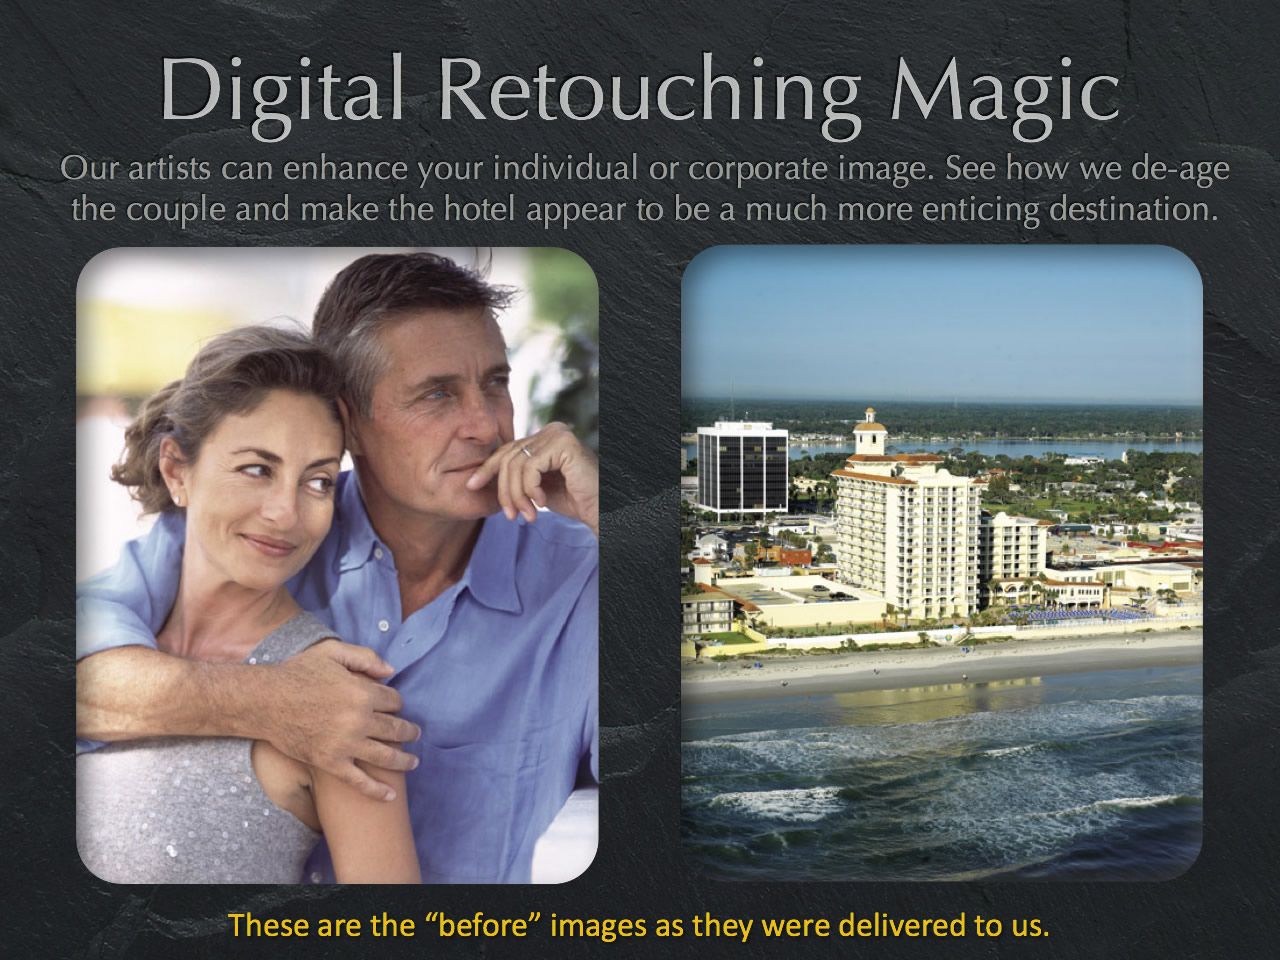 Note how prior to digital retouch work, each image has details that beg for some attention